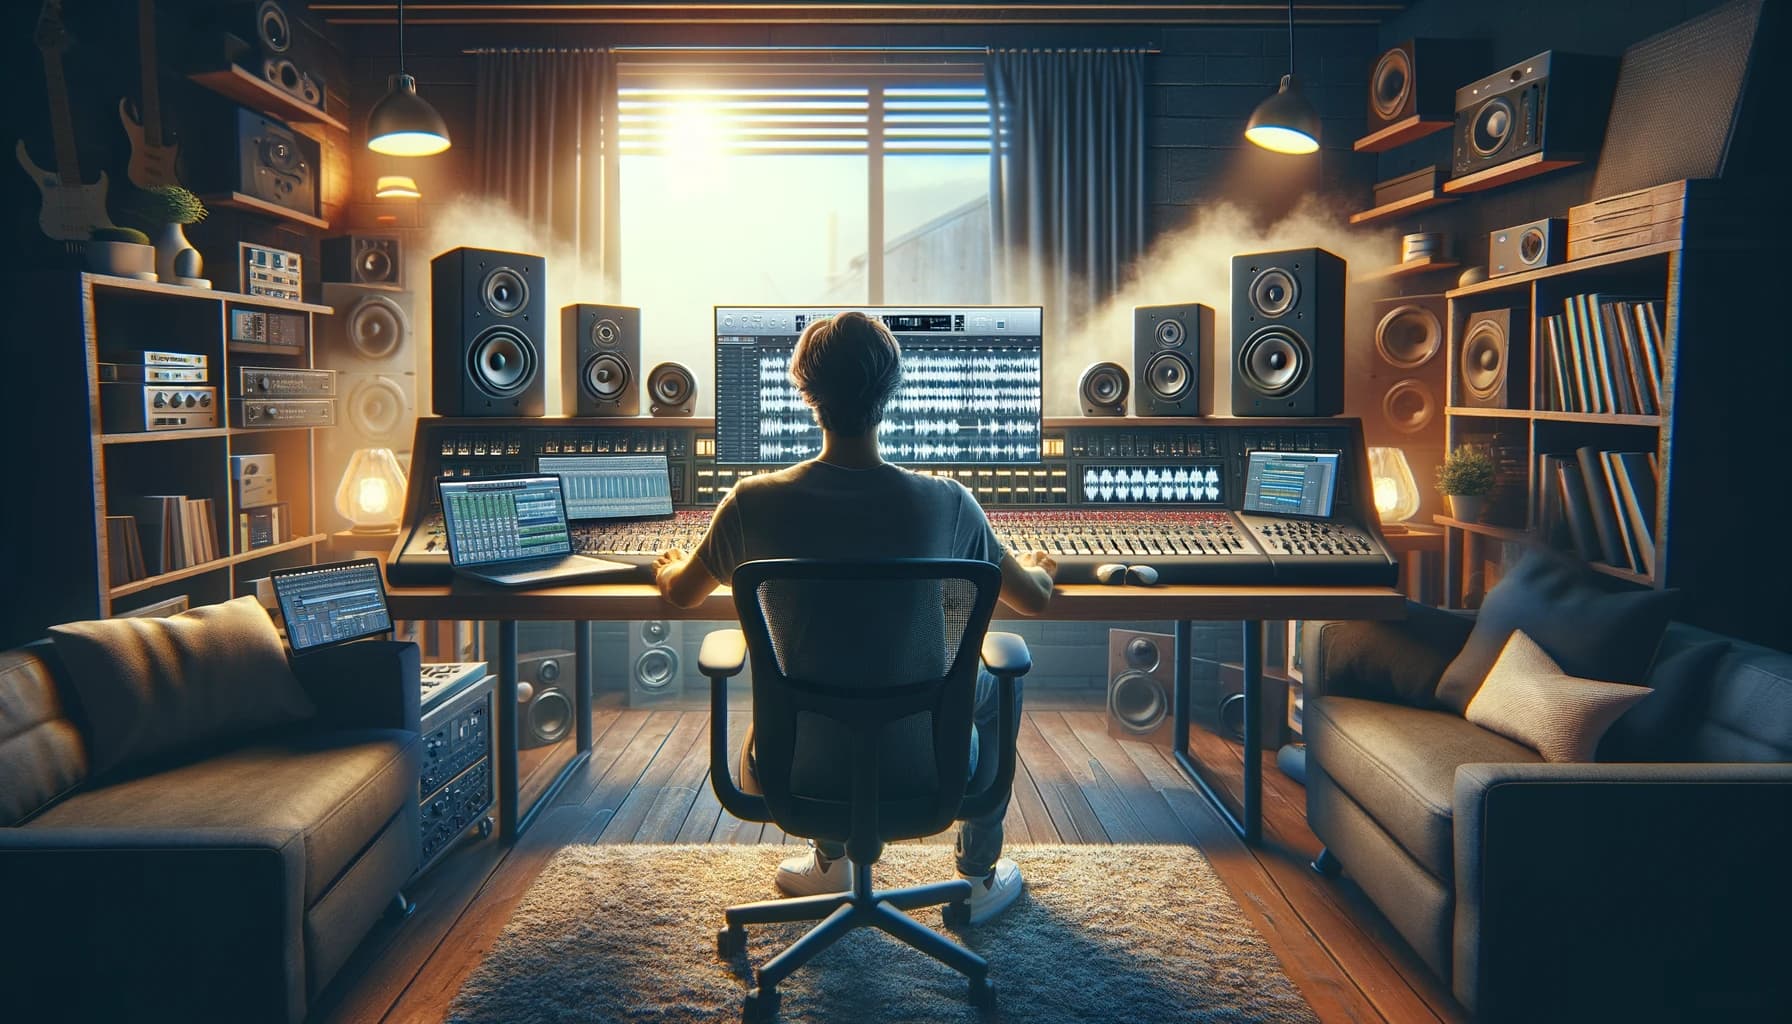 An image of a home studio music producer working on creating immersive or spatial audio masters.